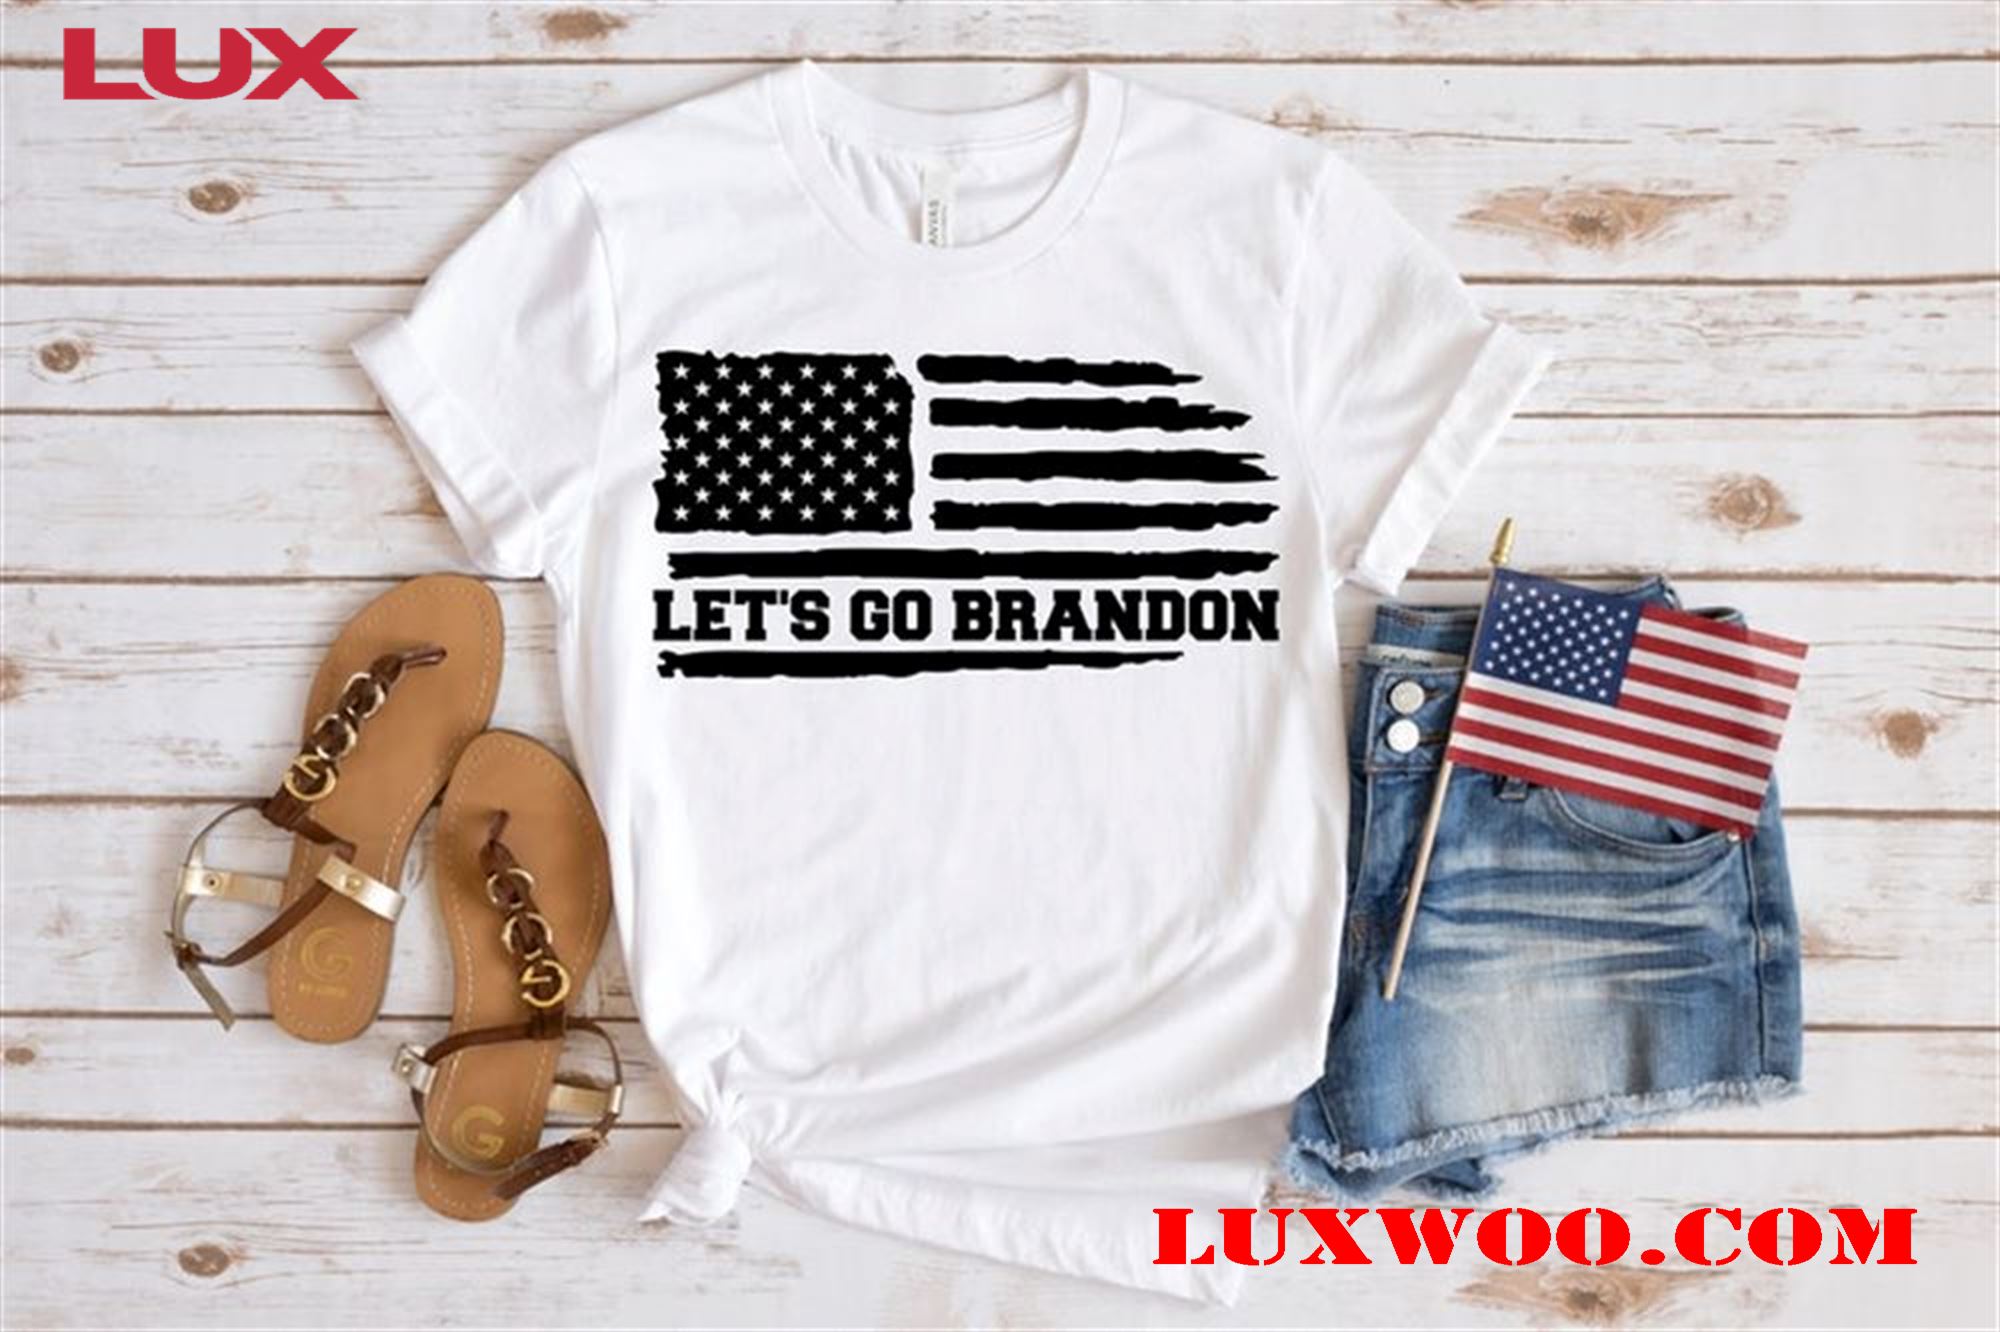 Express Your Political Views With A Stylish Brandon Shirt